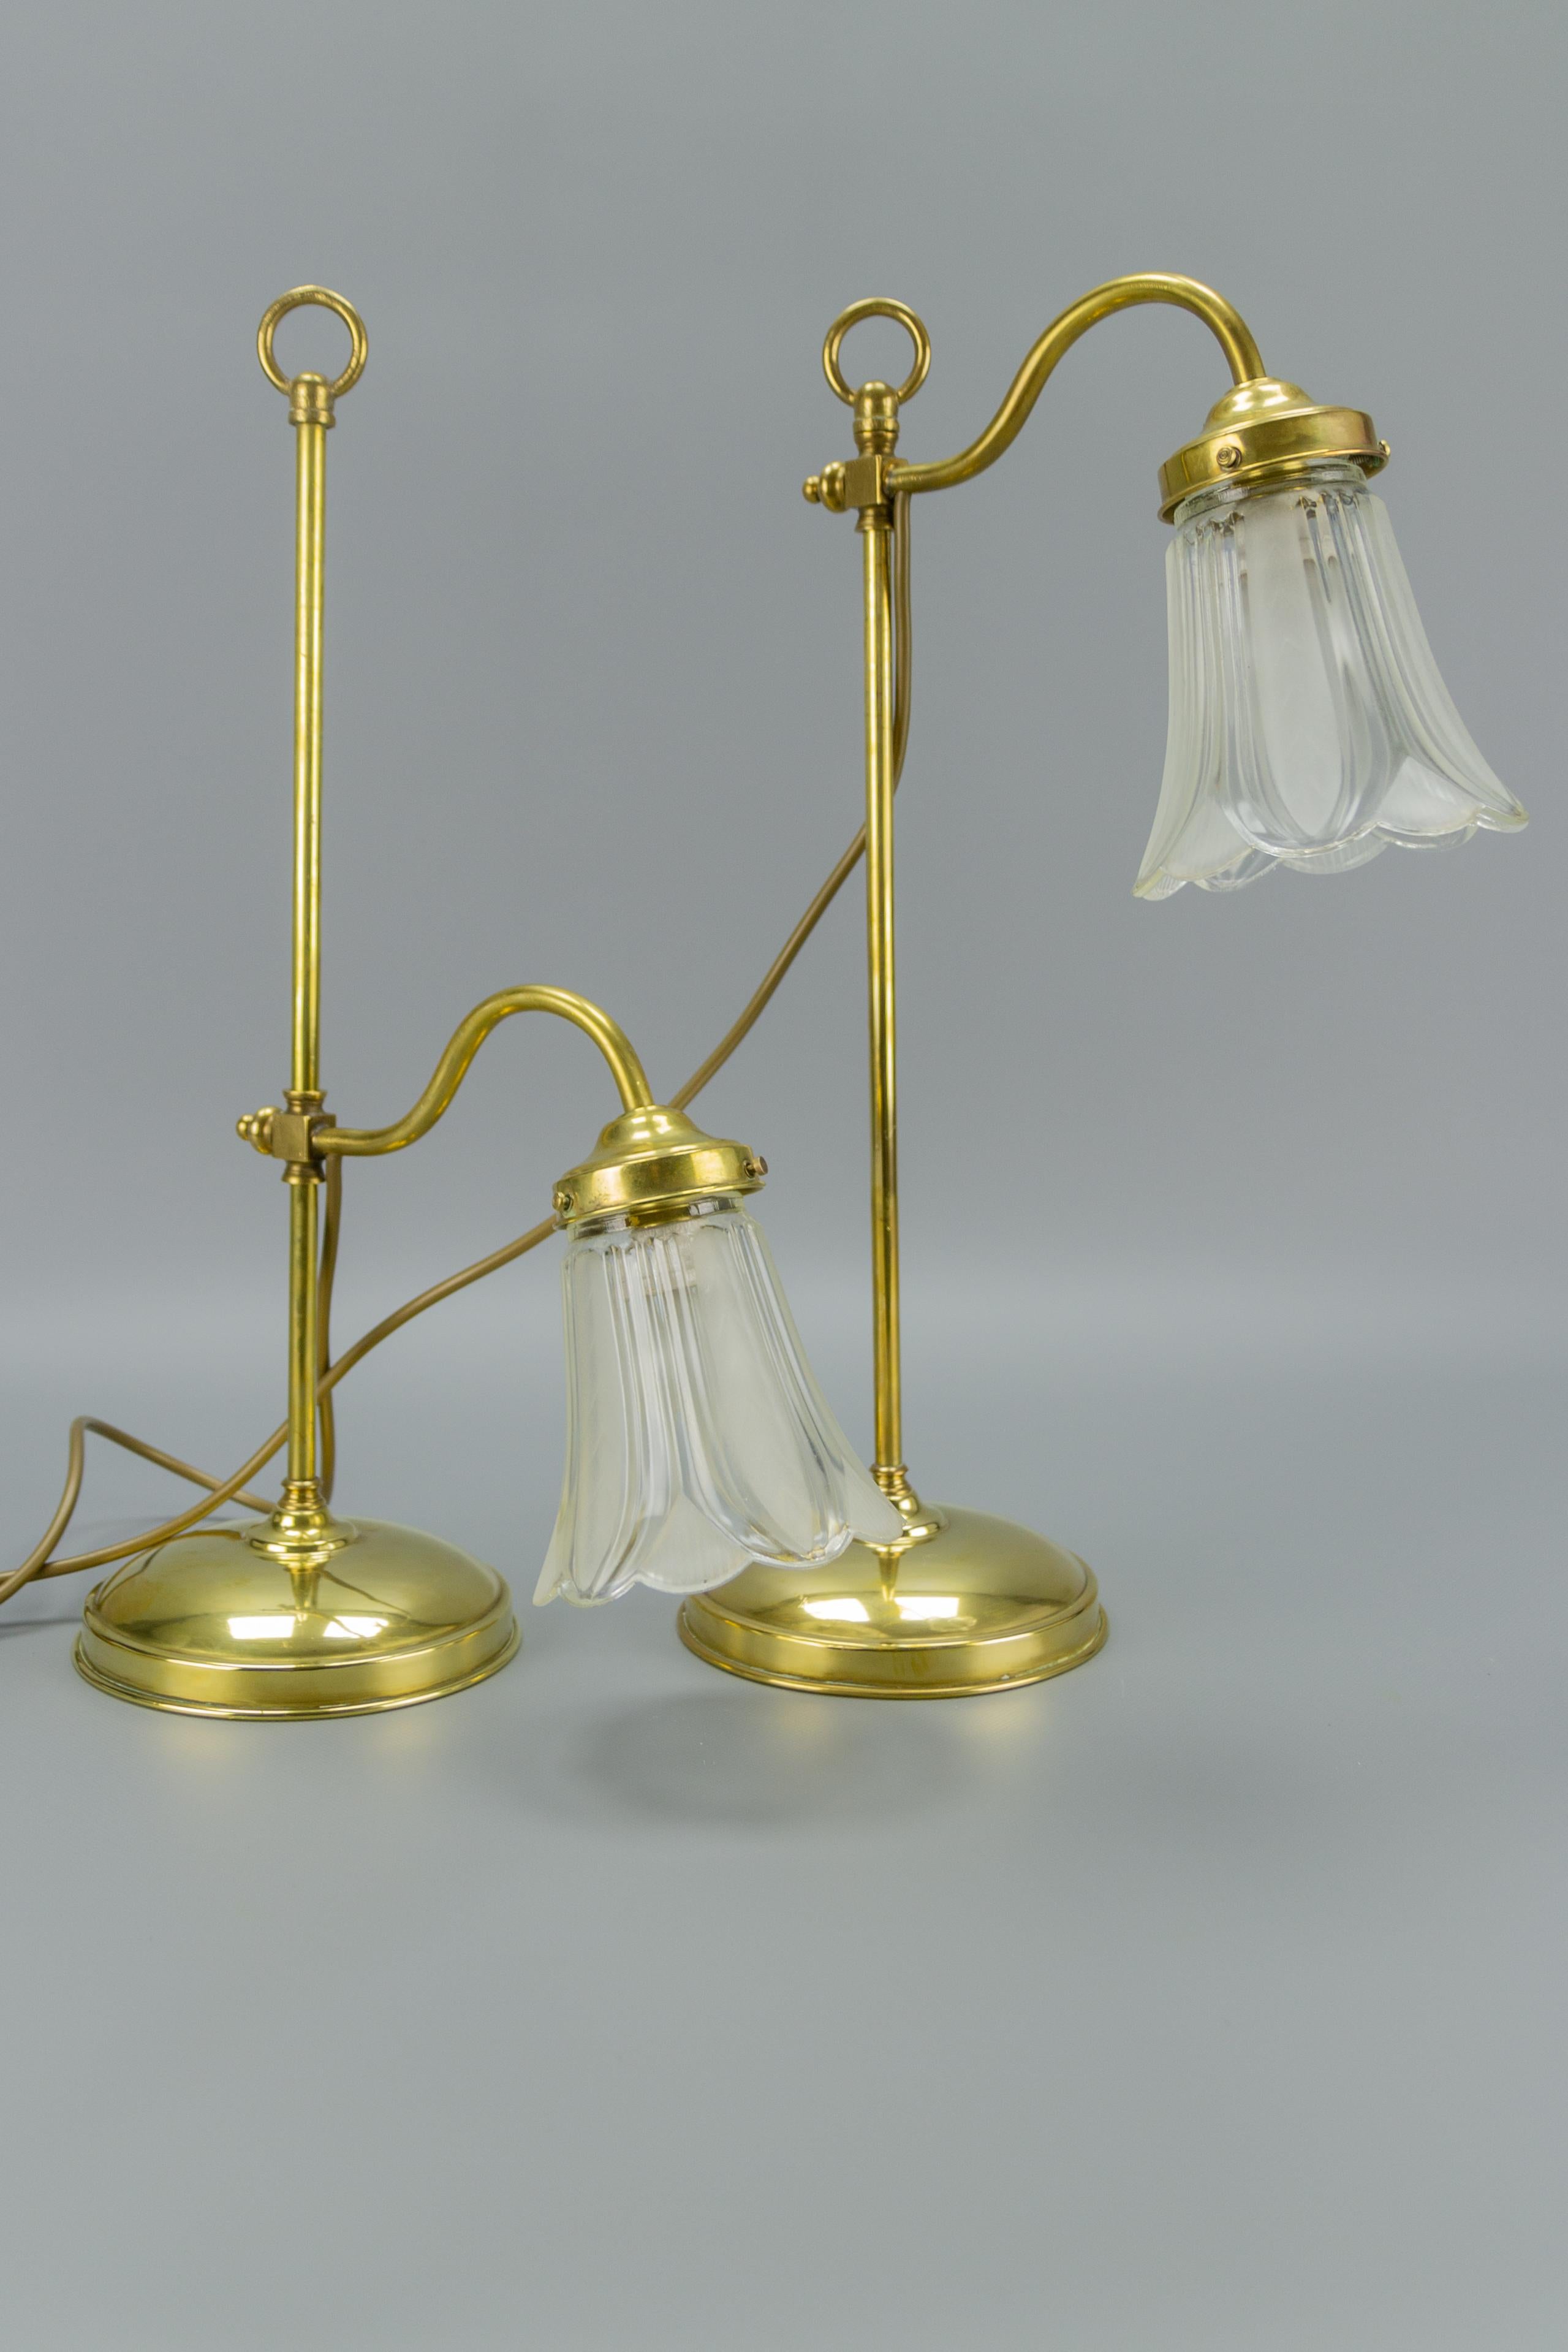 Pair of French Art Nouveau Brass and Floral Shaped Glass Table Lamps In Good Condition For Sale In Barntrup, DE